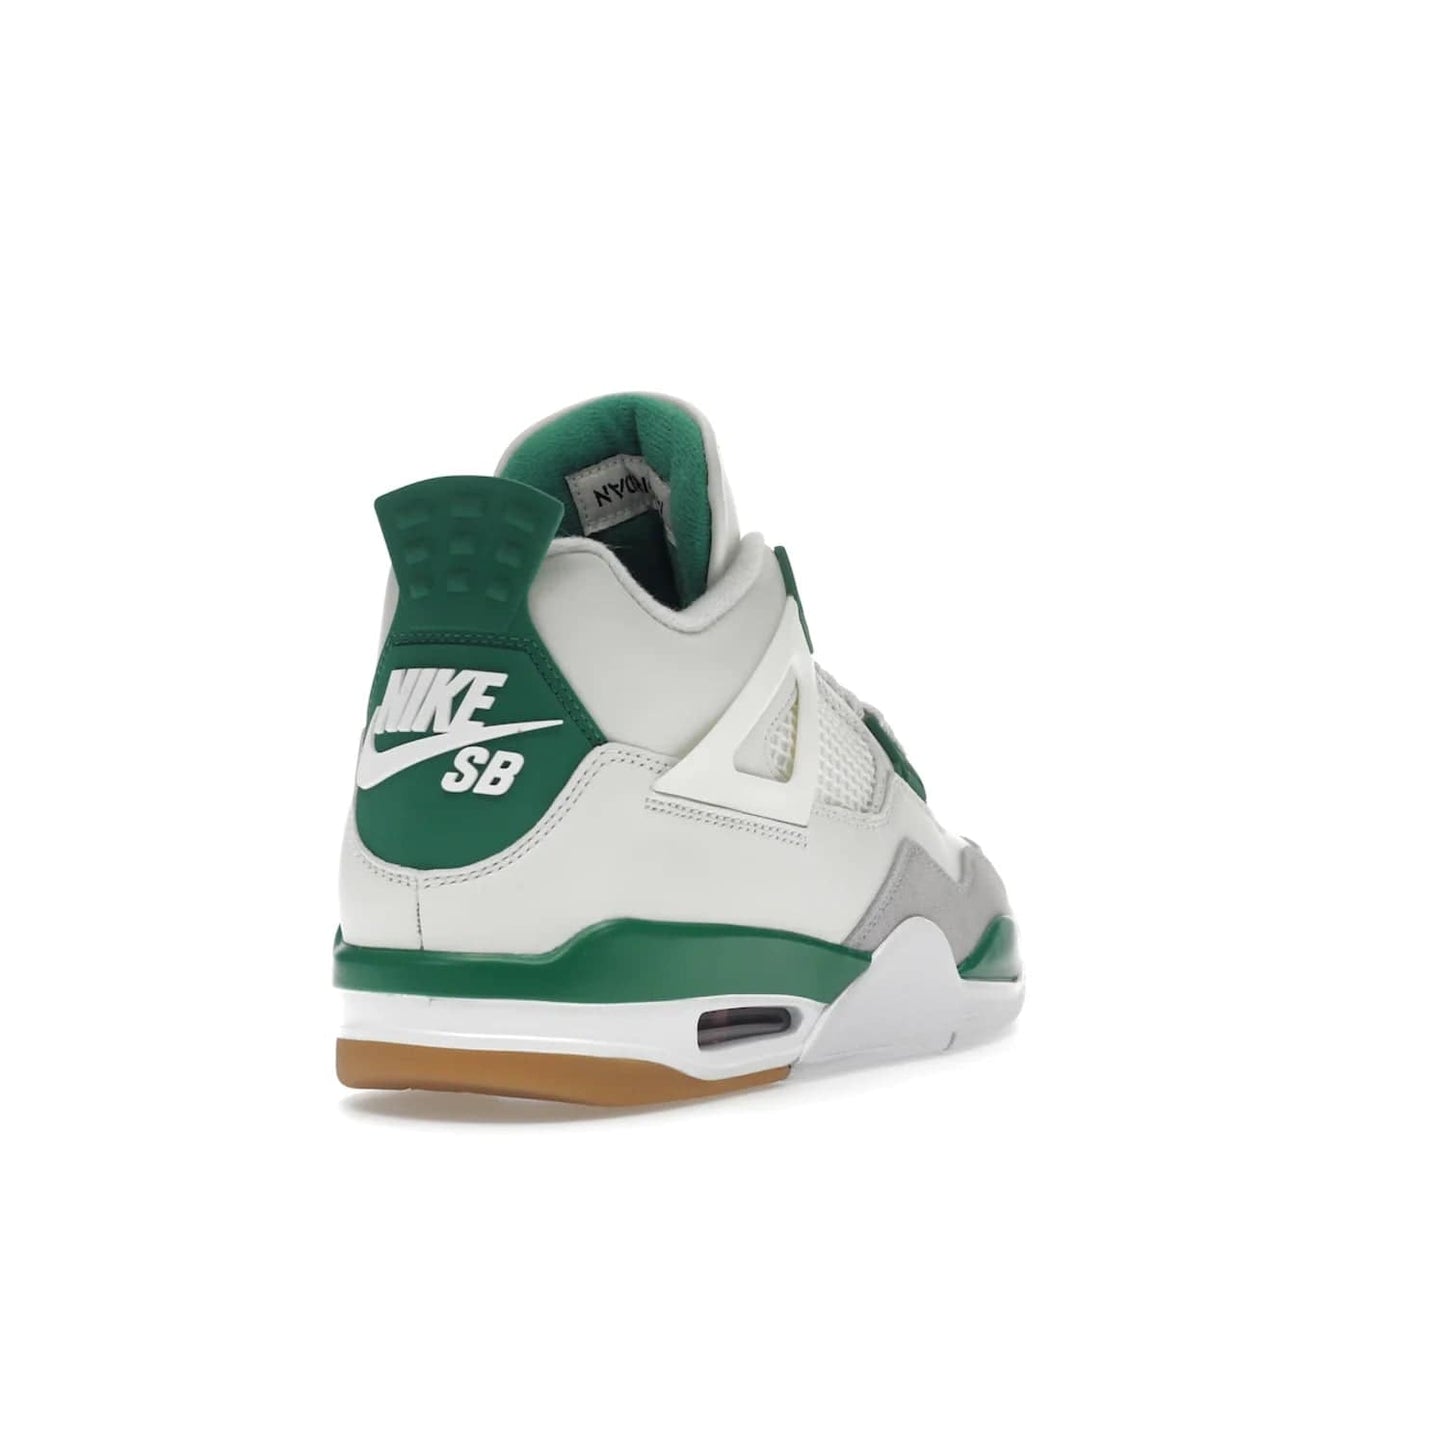 Jordan 4 Retro SB Pine Green - Image 31 - Only at www.BallersClubKickz.com - A white leather upper combined with a Neutral Grey suede mudguard gives this limited Air Jordan 4 Retro SB Pine Green sneaker its unmistakable style. Released March 20, 2023, the Jordan 4 Retro SB features a white and Pine Green midsole plus a red air unit with a gum outsole for grip. The perfect blend of Nike SB skateboarding and Jordan 4 classic design.